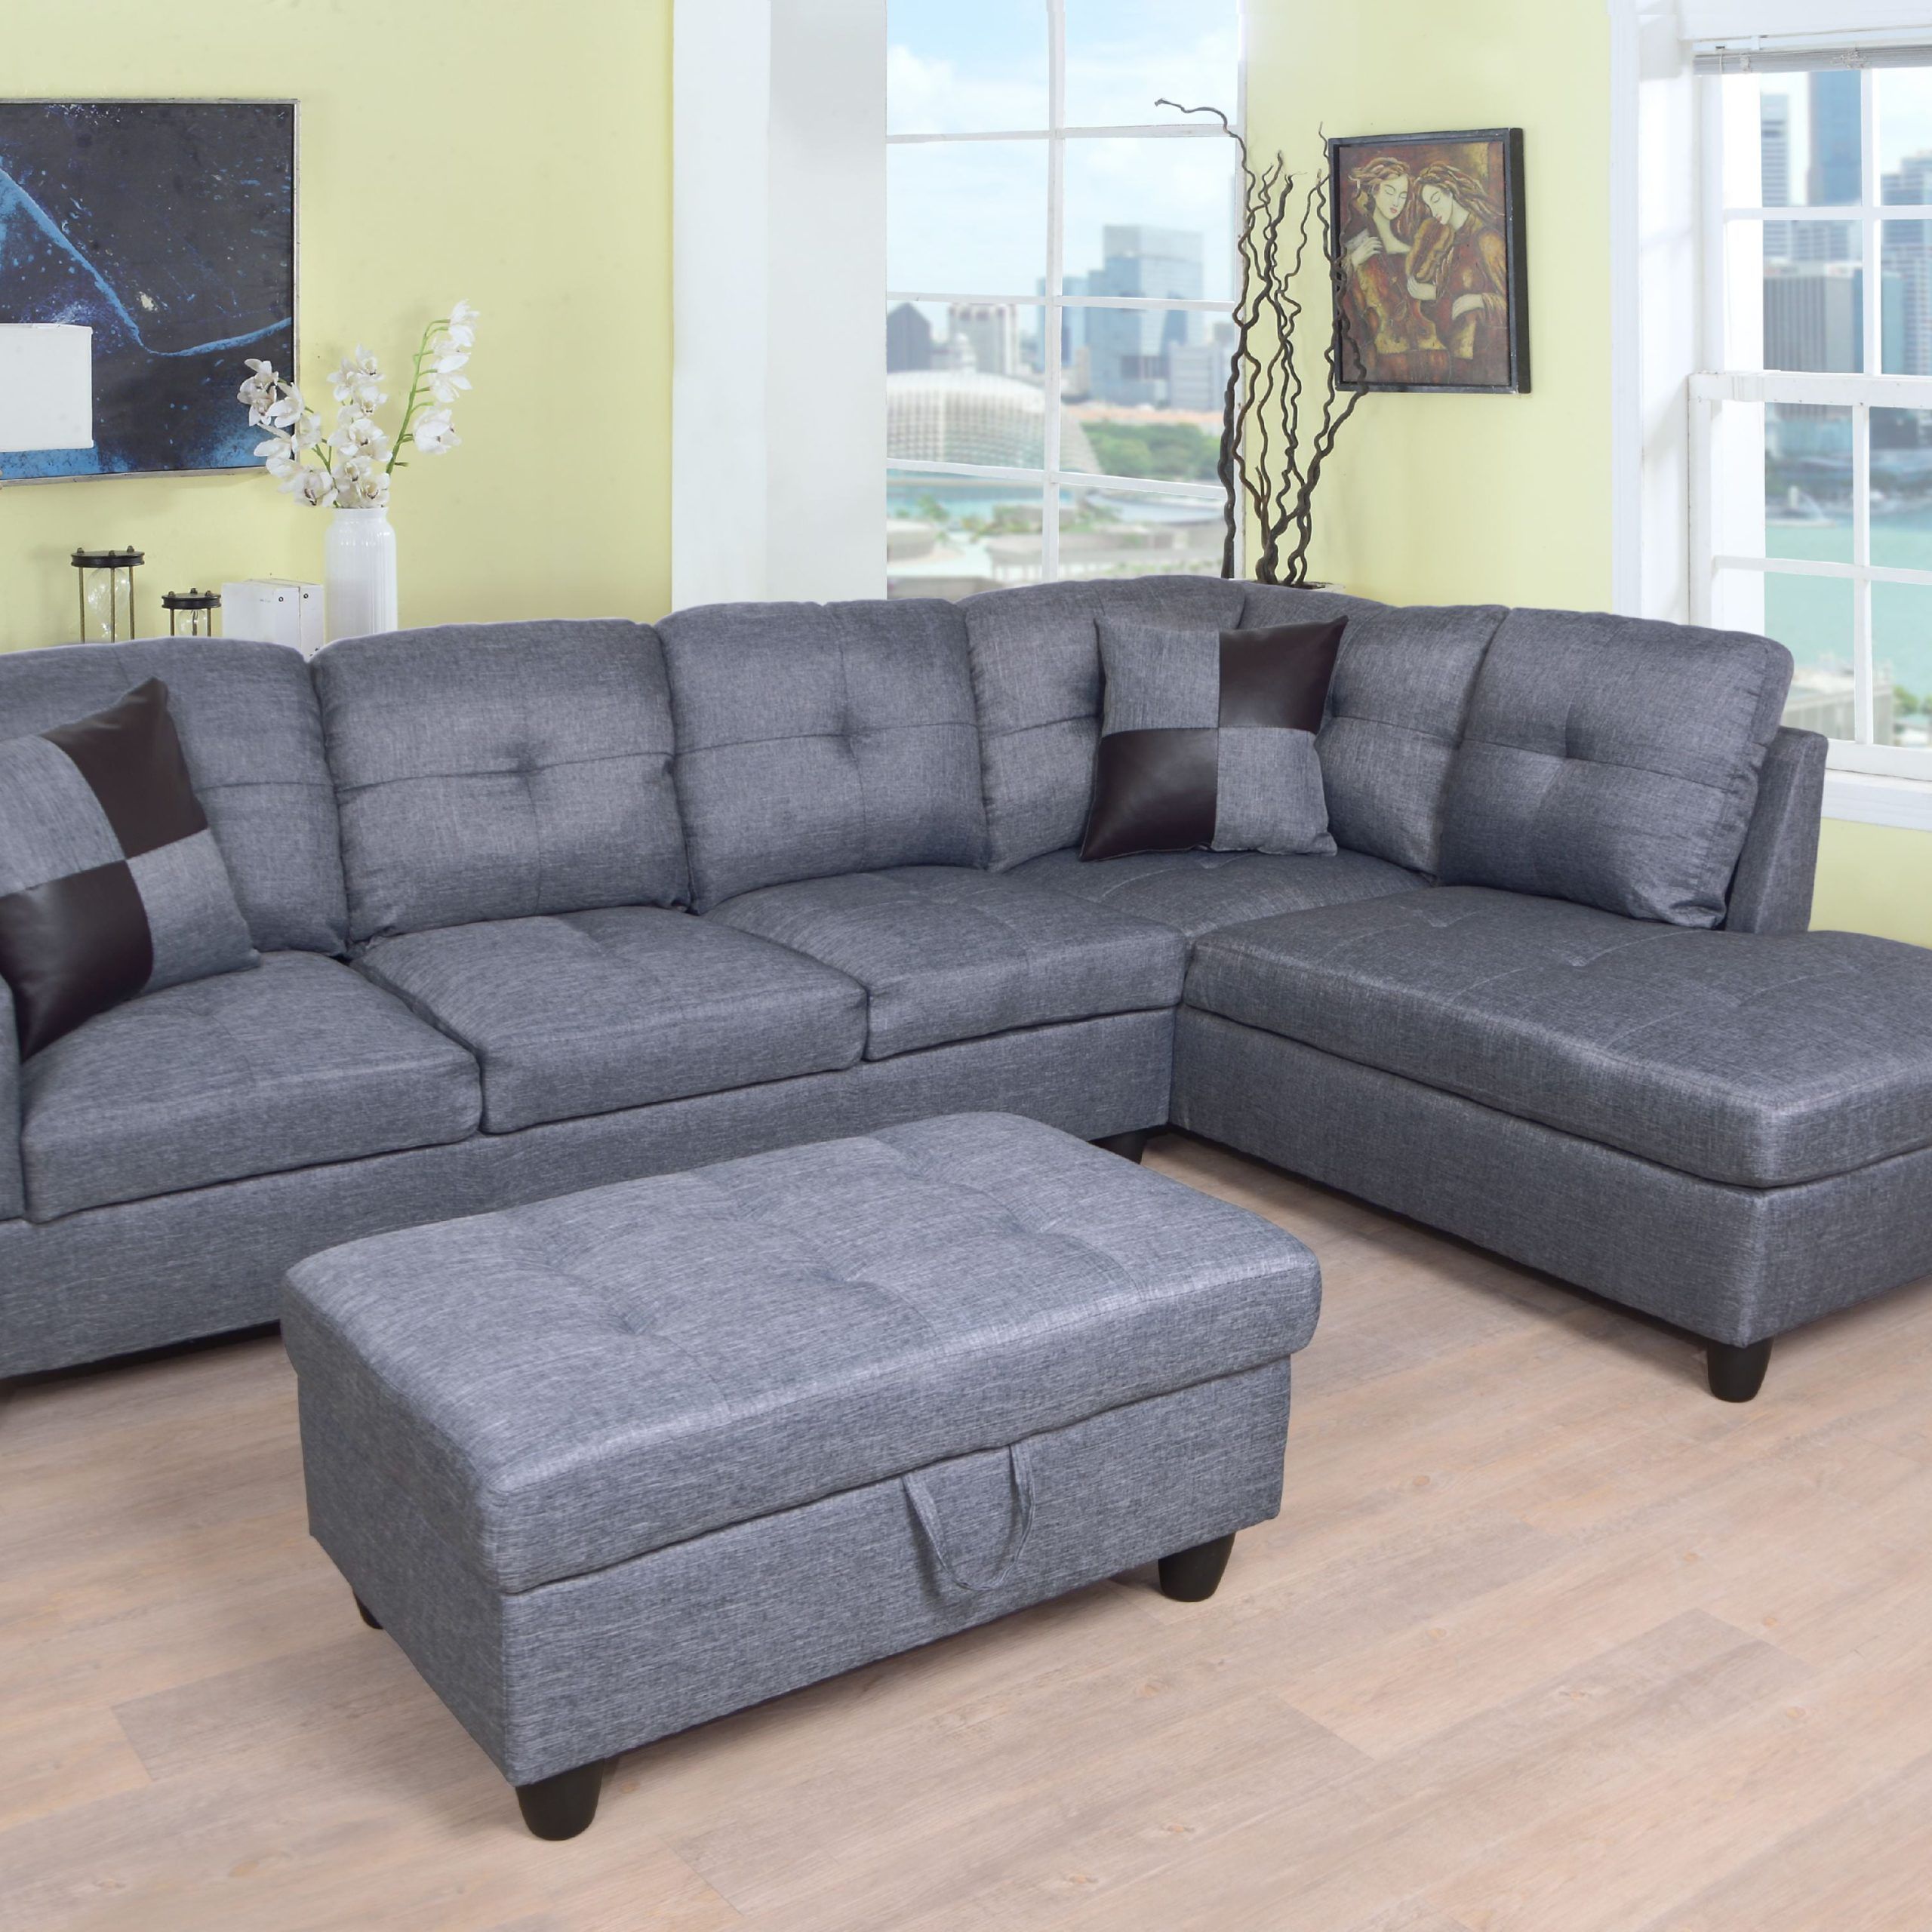 Sam Left Facing Sectional Sofa With Ottoman, Grey – Walmart For Most Current Sofas With Ottomans (View 6 of 15)